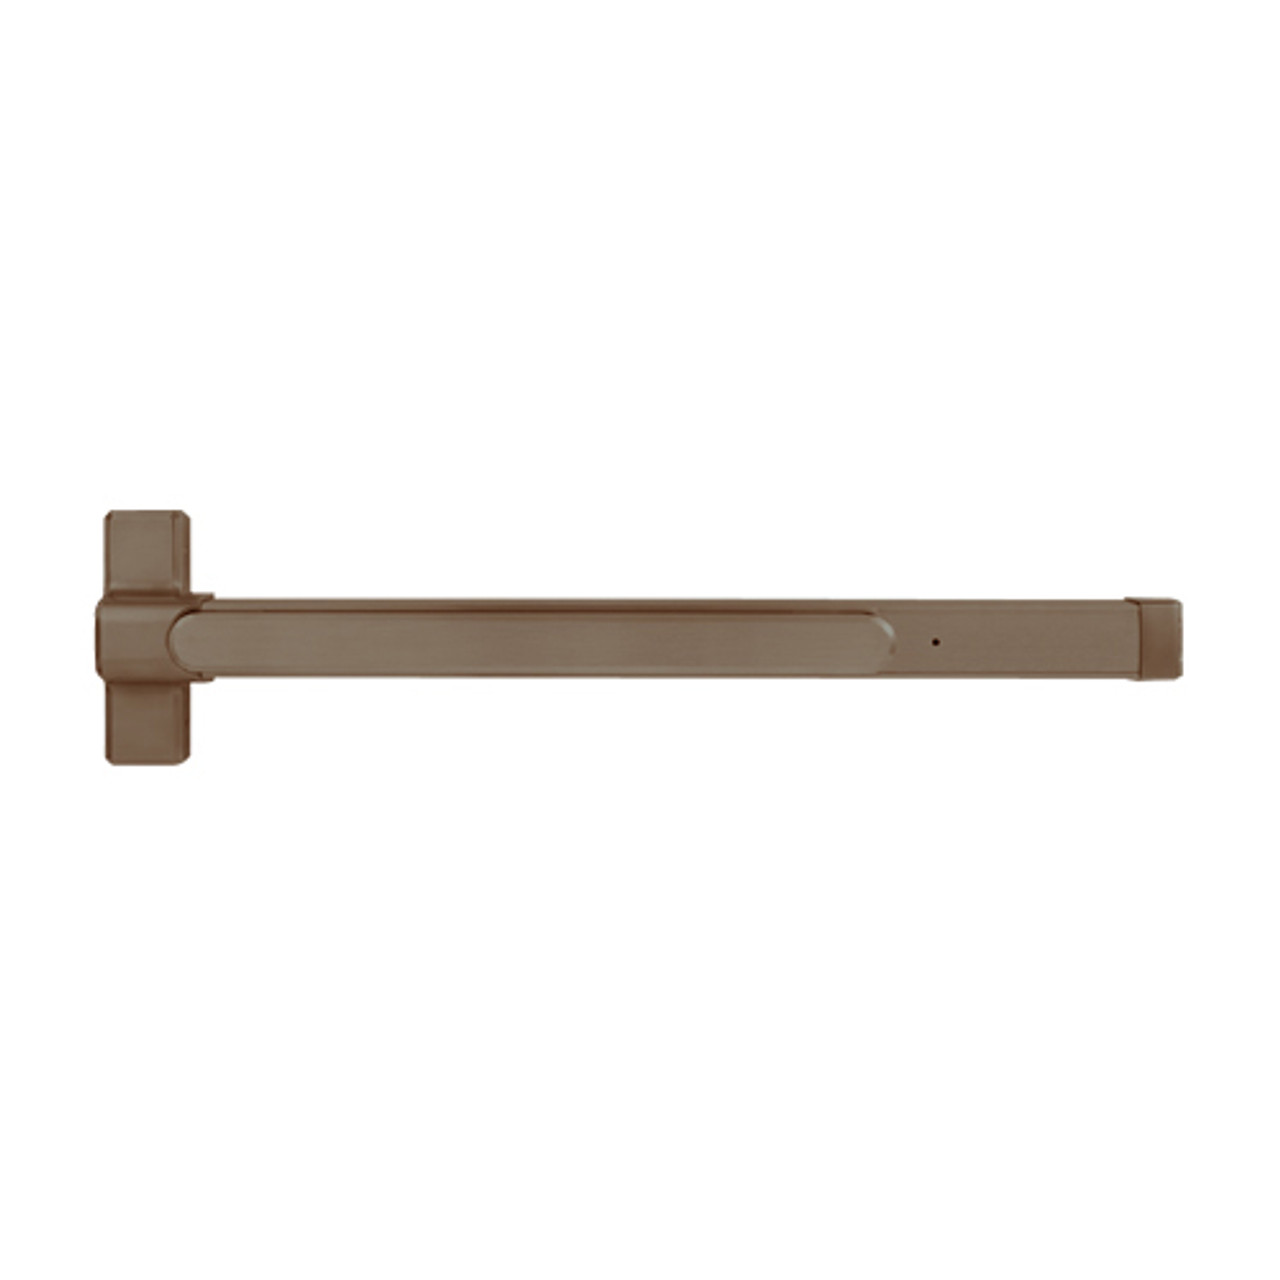 QED119X-36-7-313AN Stanley QED100 Series Heavy Duty Surface Vertical Rod Fire Rated Exit Device in Anodized Duranodic Bronze Finish